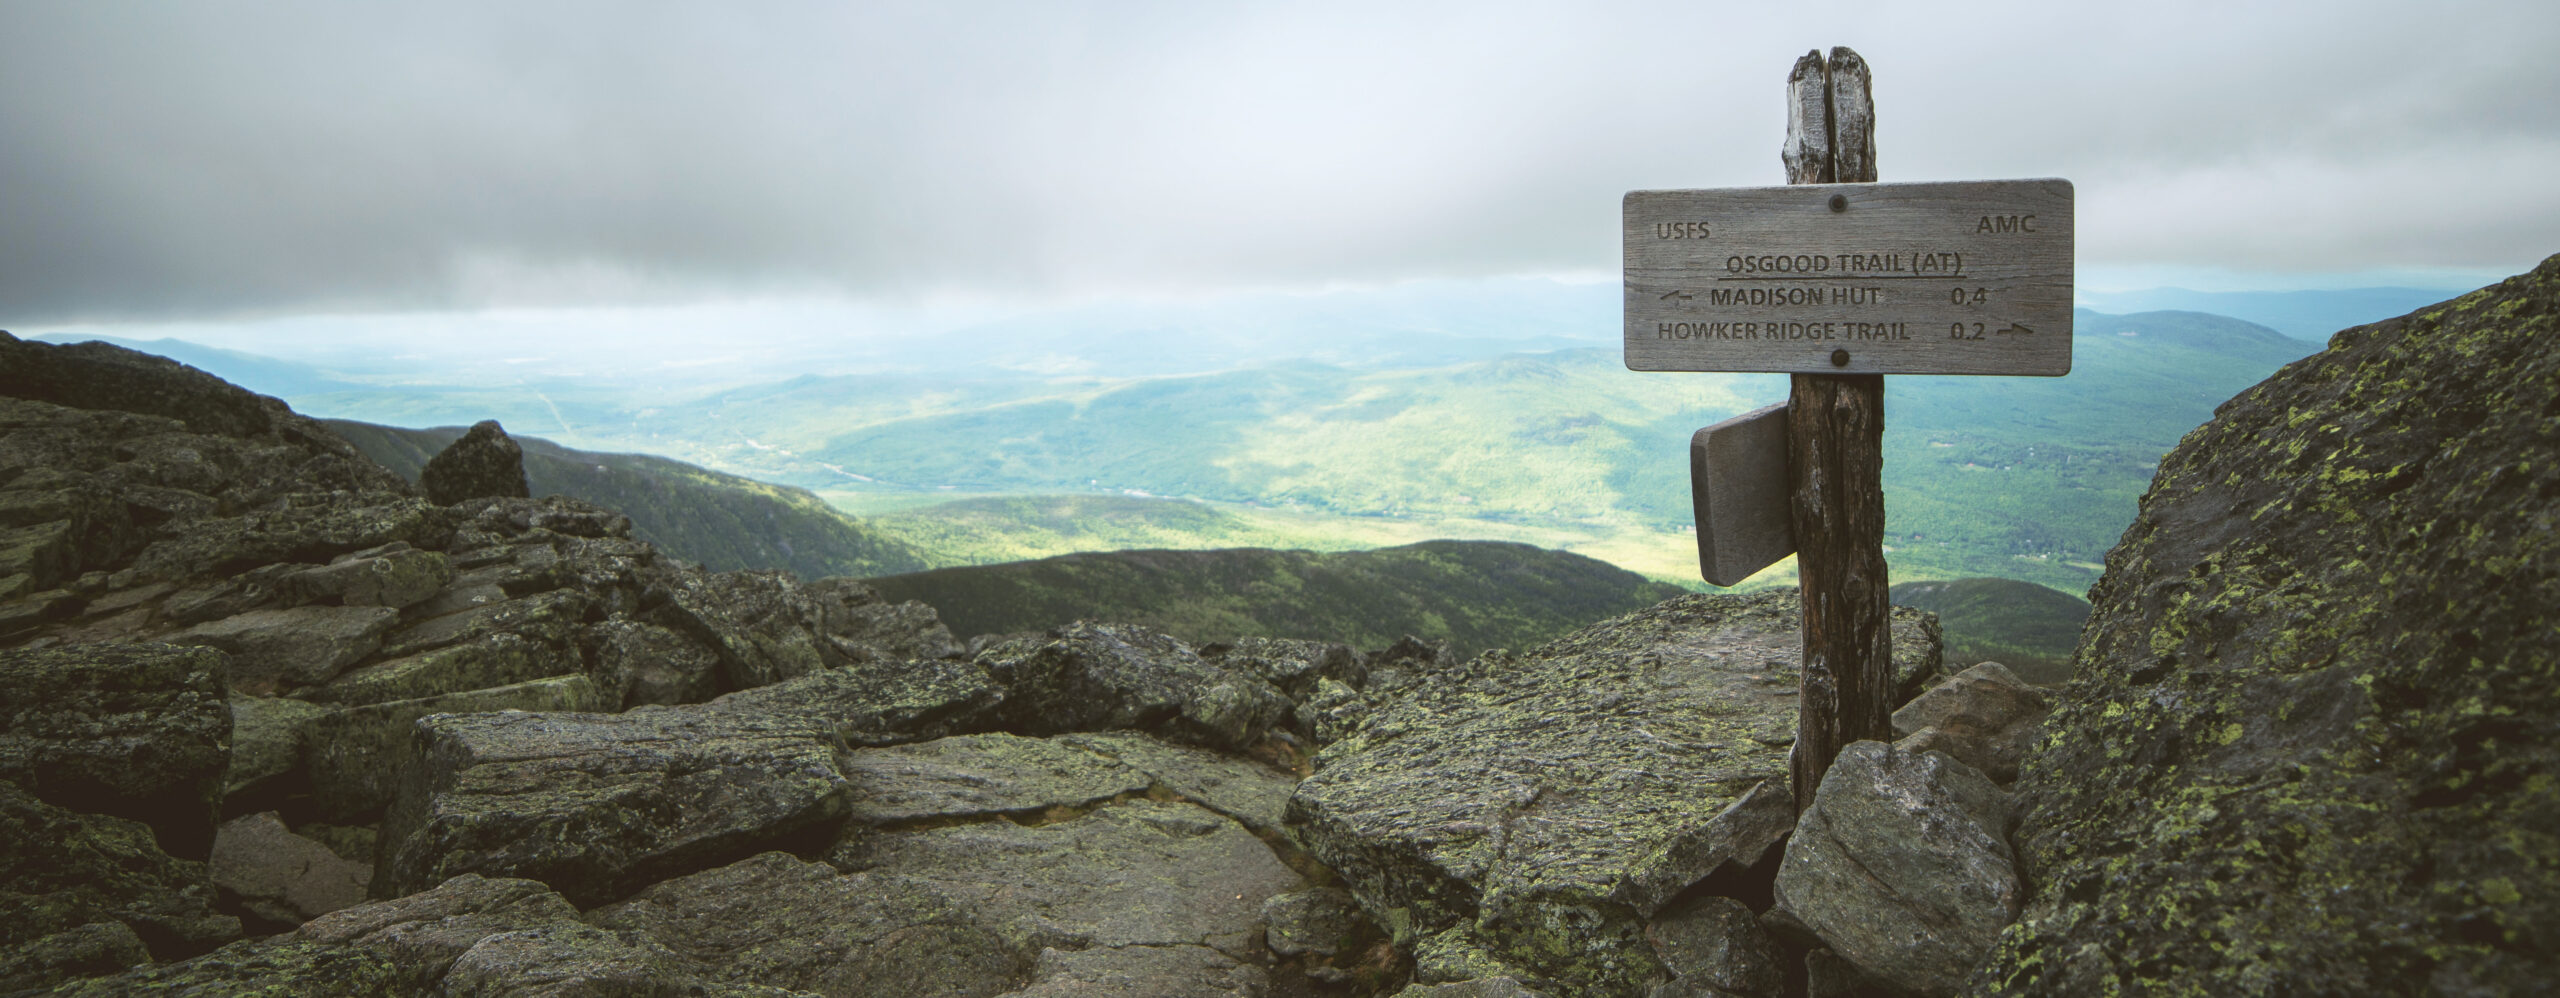 June 7, 2018. Sign for Osgood Trail, AMC Madison Spring Hut (Presidential Range), Great Gulf Wilderness, White Mountain National Forest, New Hampshire-- Photo by Paula Champagne.